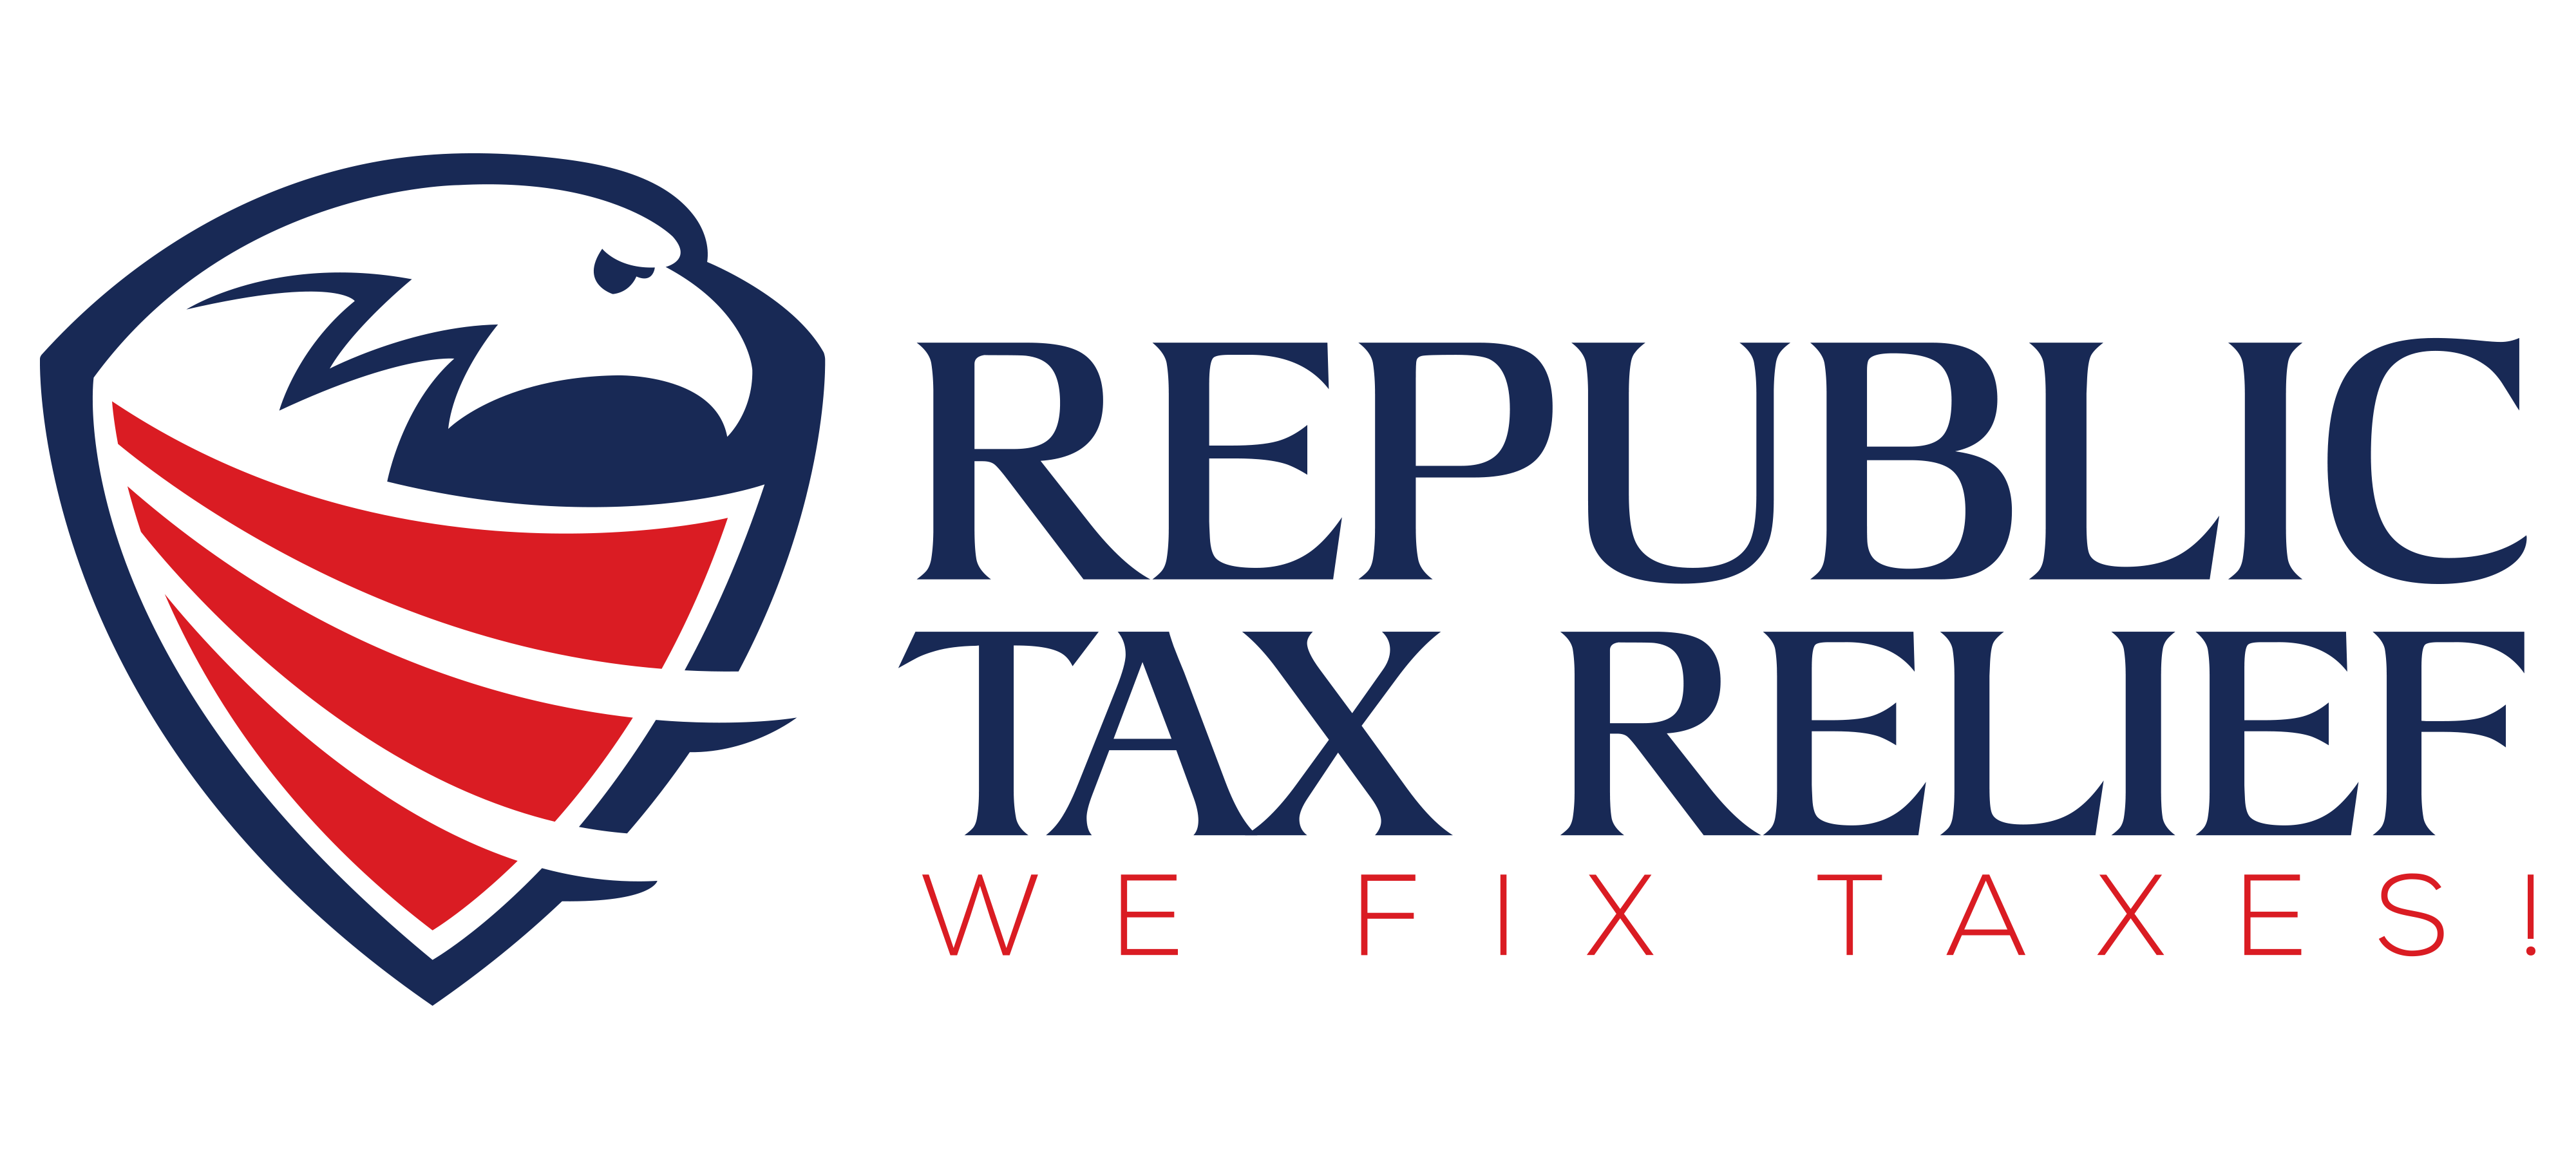 republic-tax-relief-ranks-783-on-the-2020-inc-5000-list-of-america-s